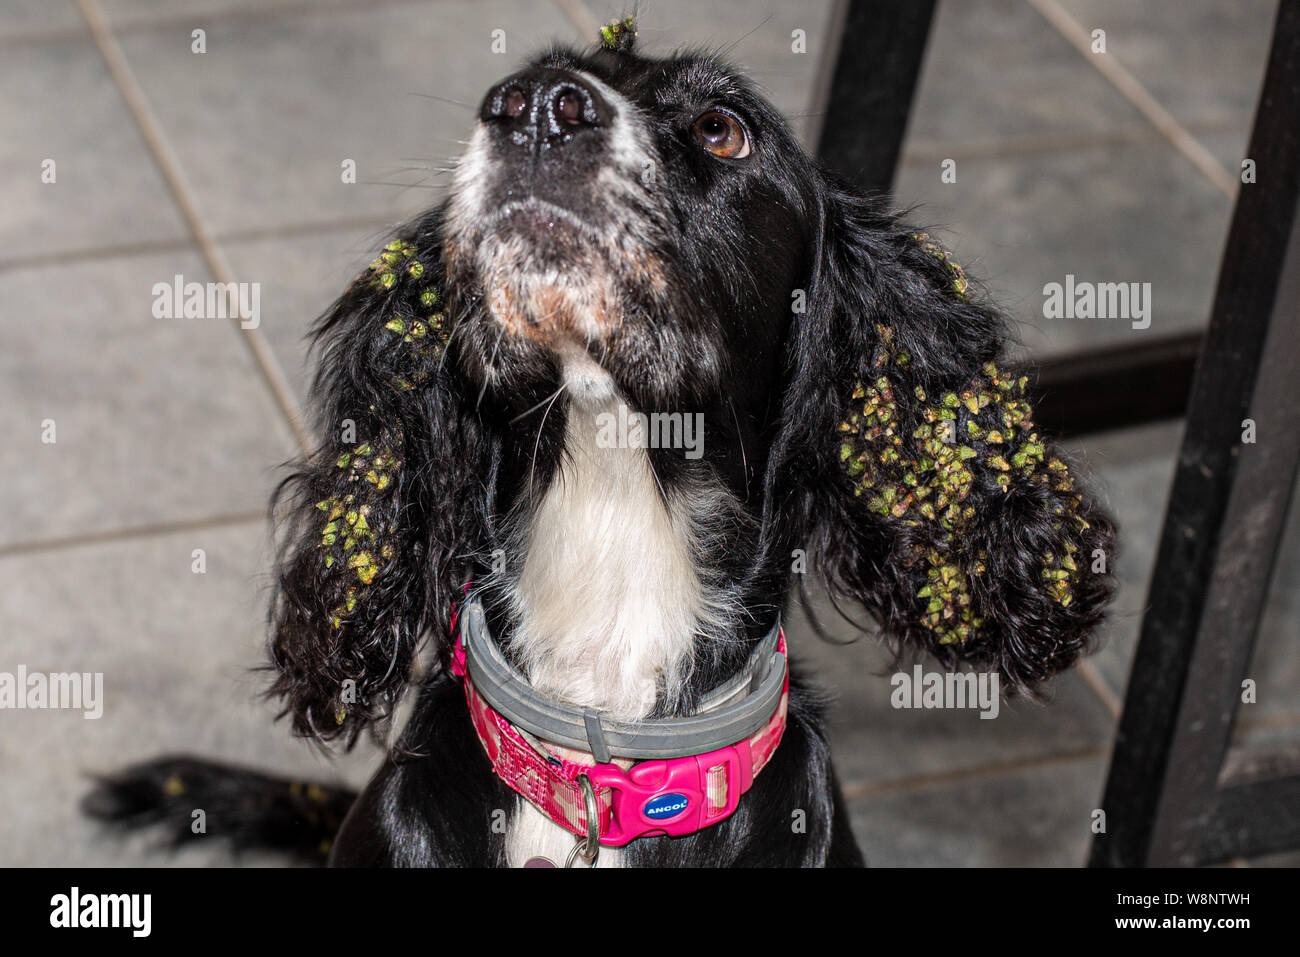 Black cocker spaniel with long ears covered in burs from seed heads entangled in fur after running through long grass Stock Photo